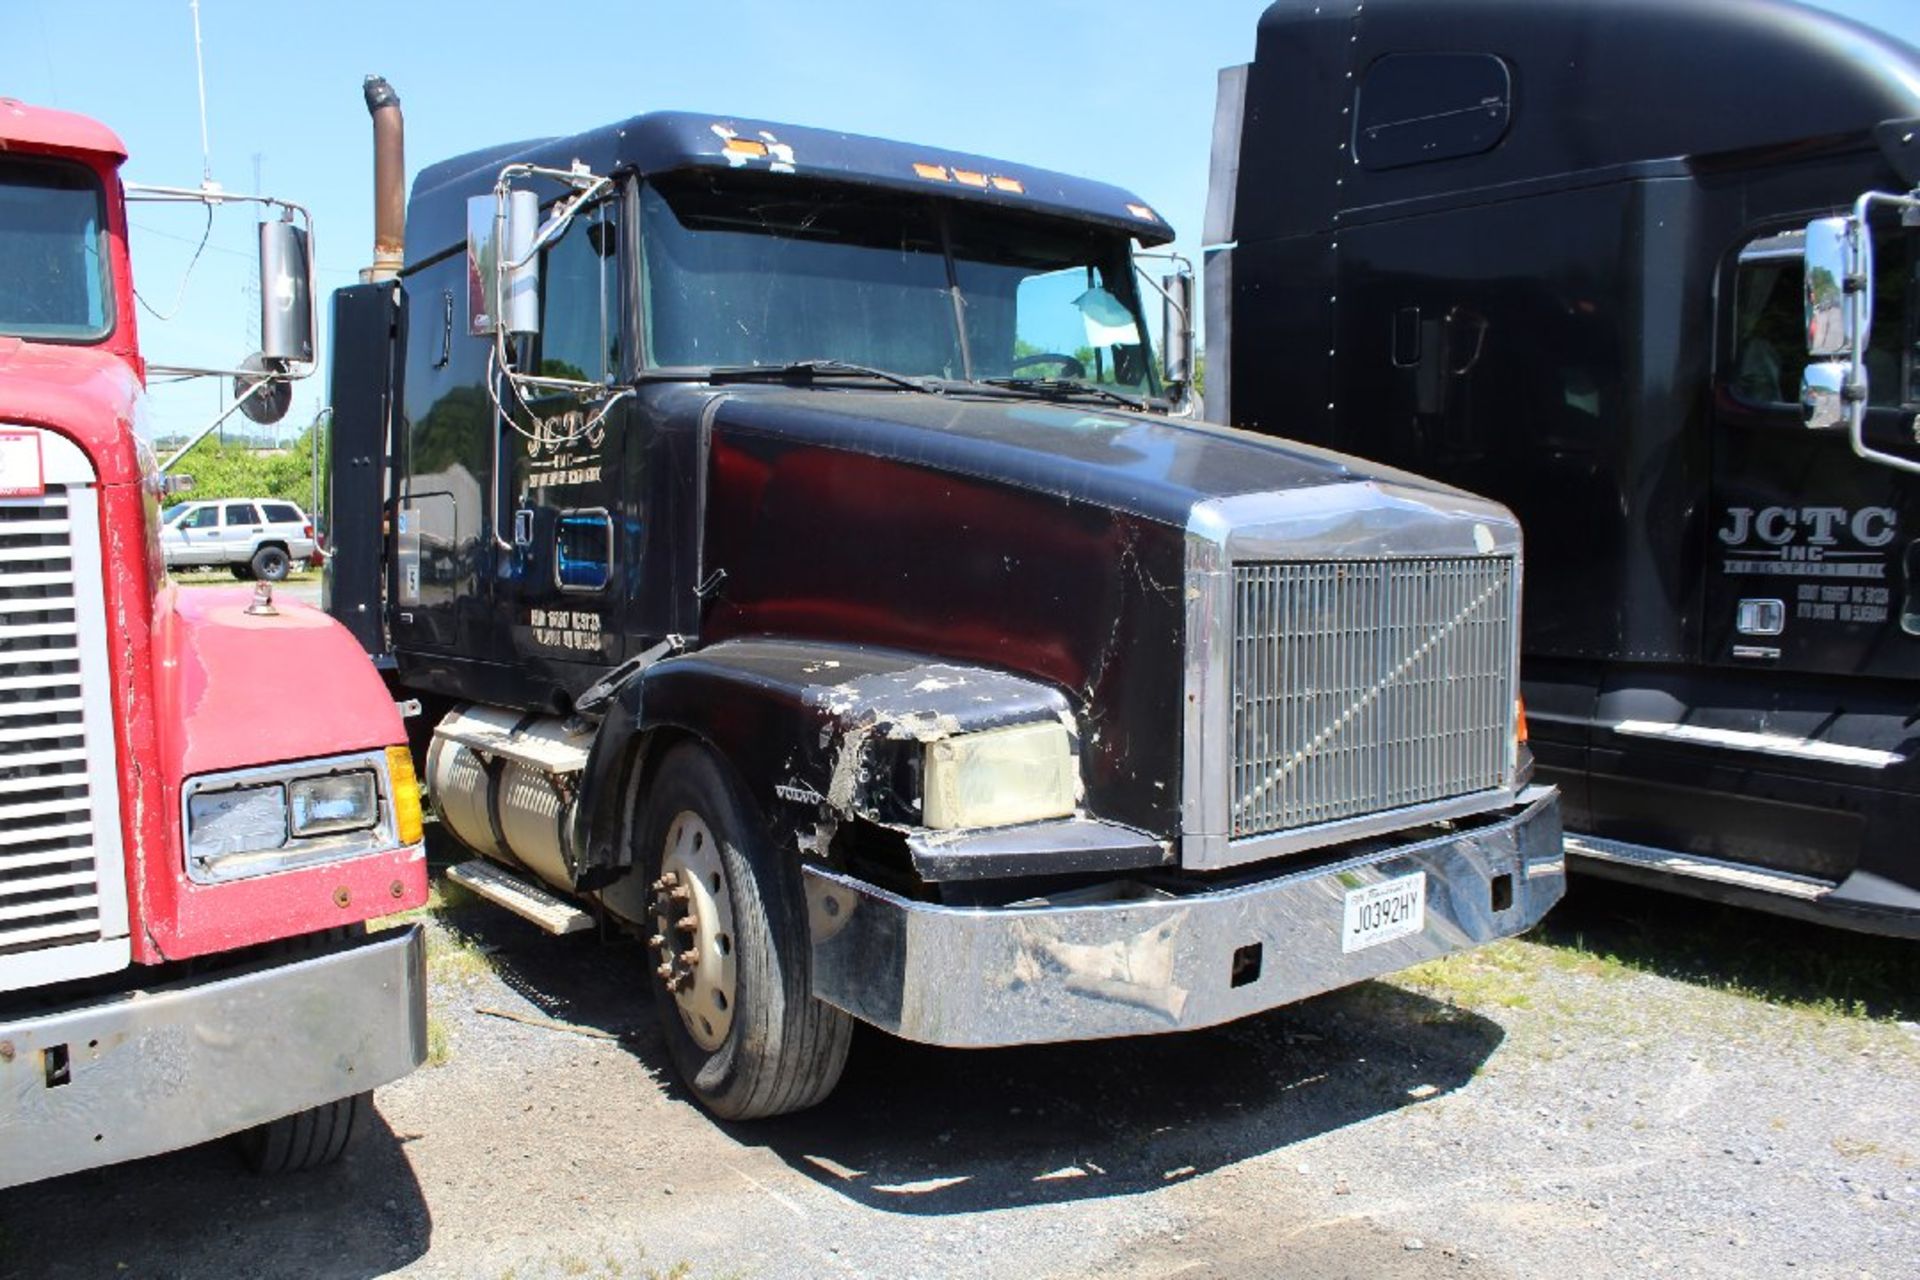 1996 Volvo Road Tractor (Salvage) Detroit Series 60 Diesel, Eaton Fuller RTLO-16713A Transmission, - Image 2 of 7